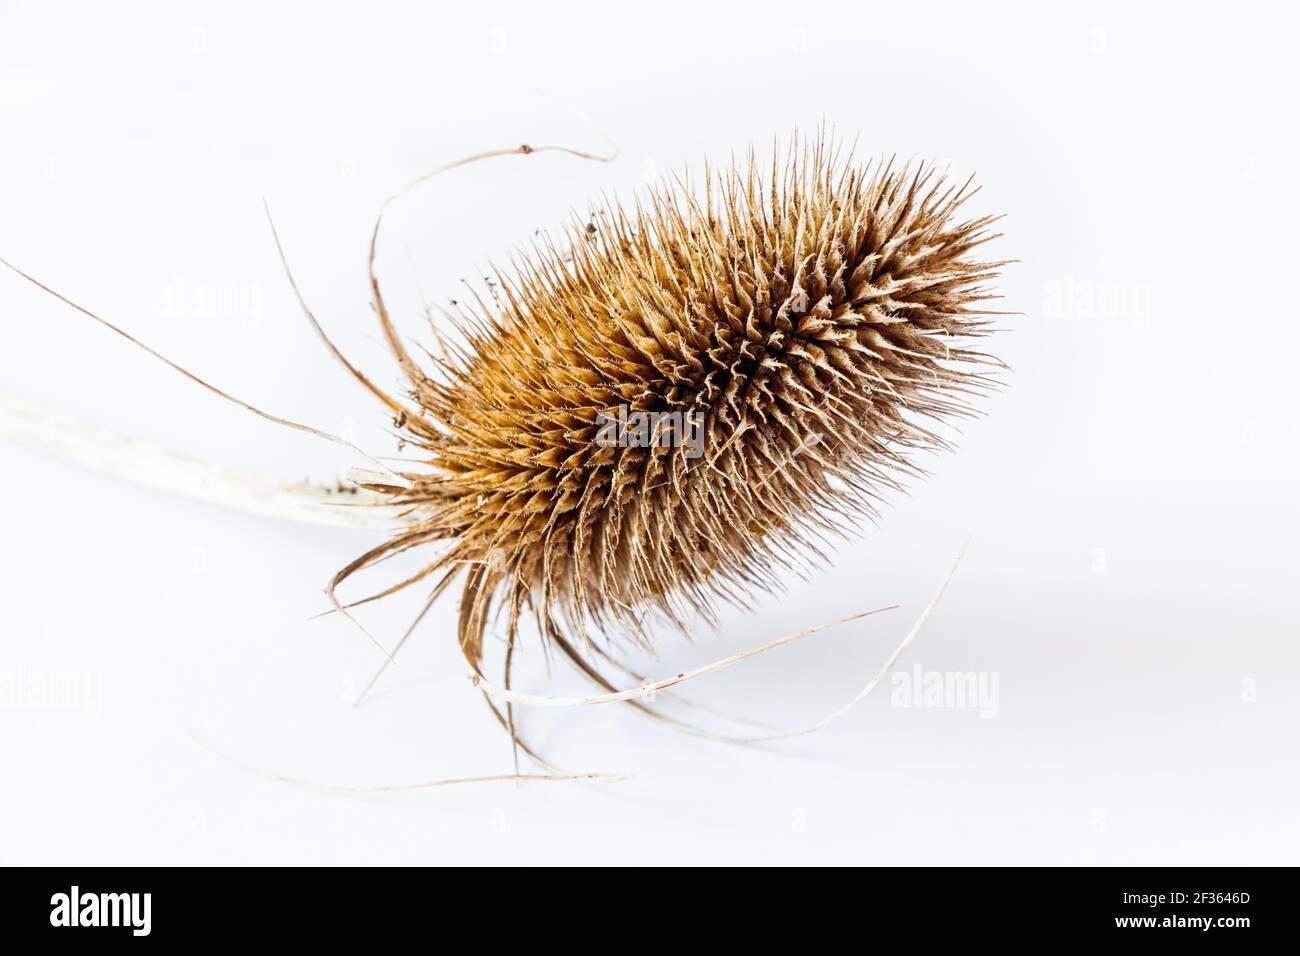 A dried brown teasel seed head on a white background Stock Photo